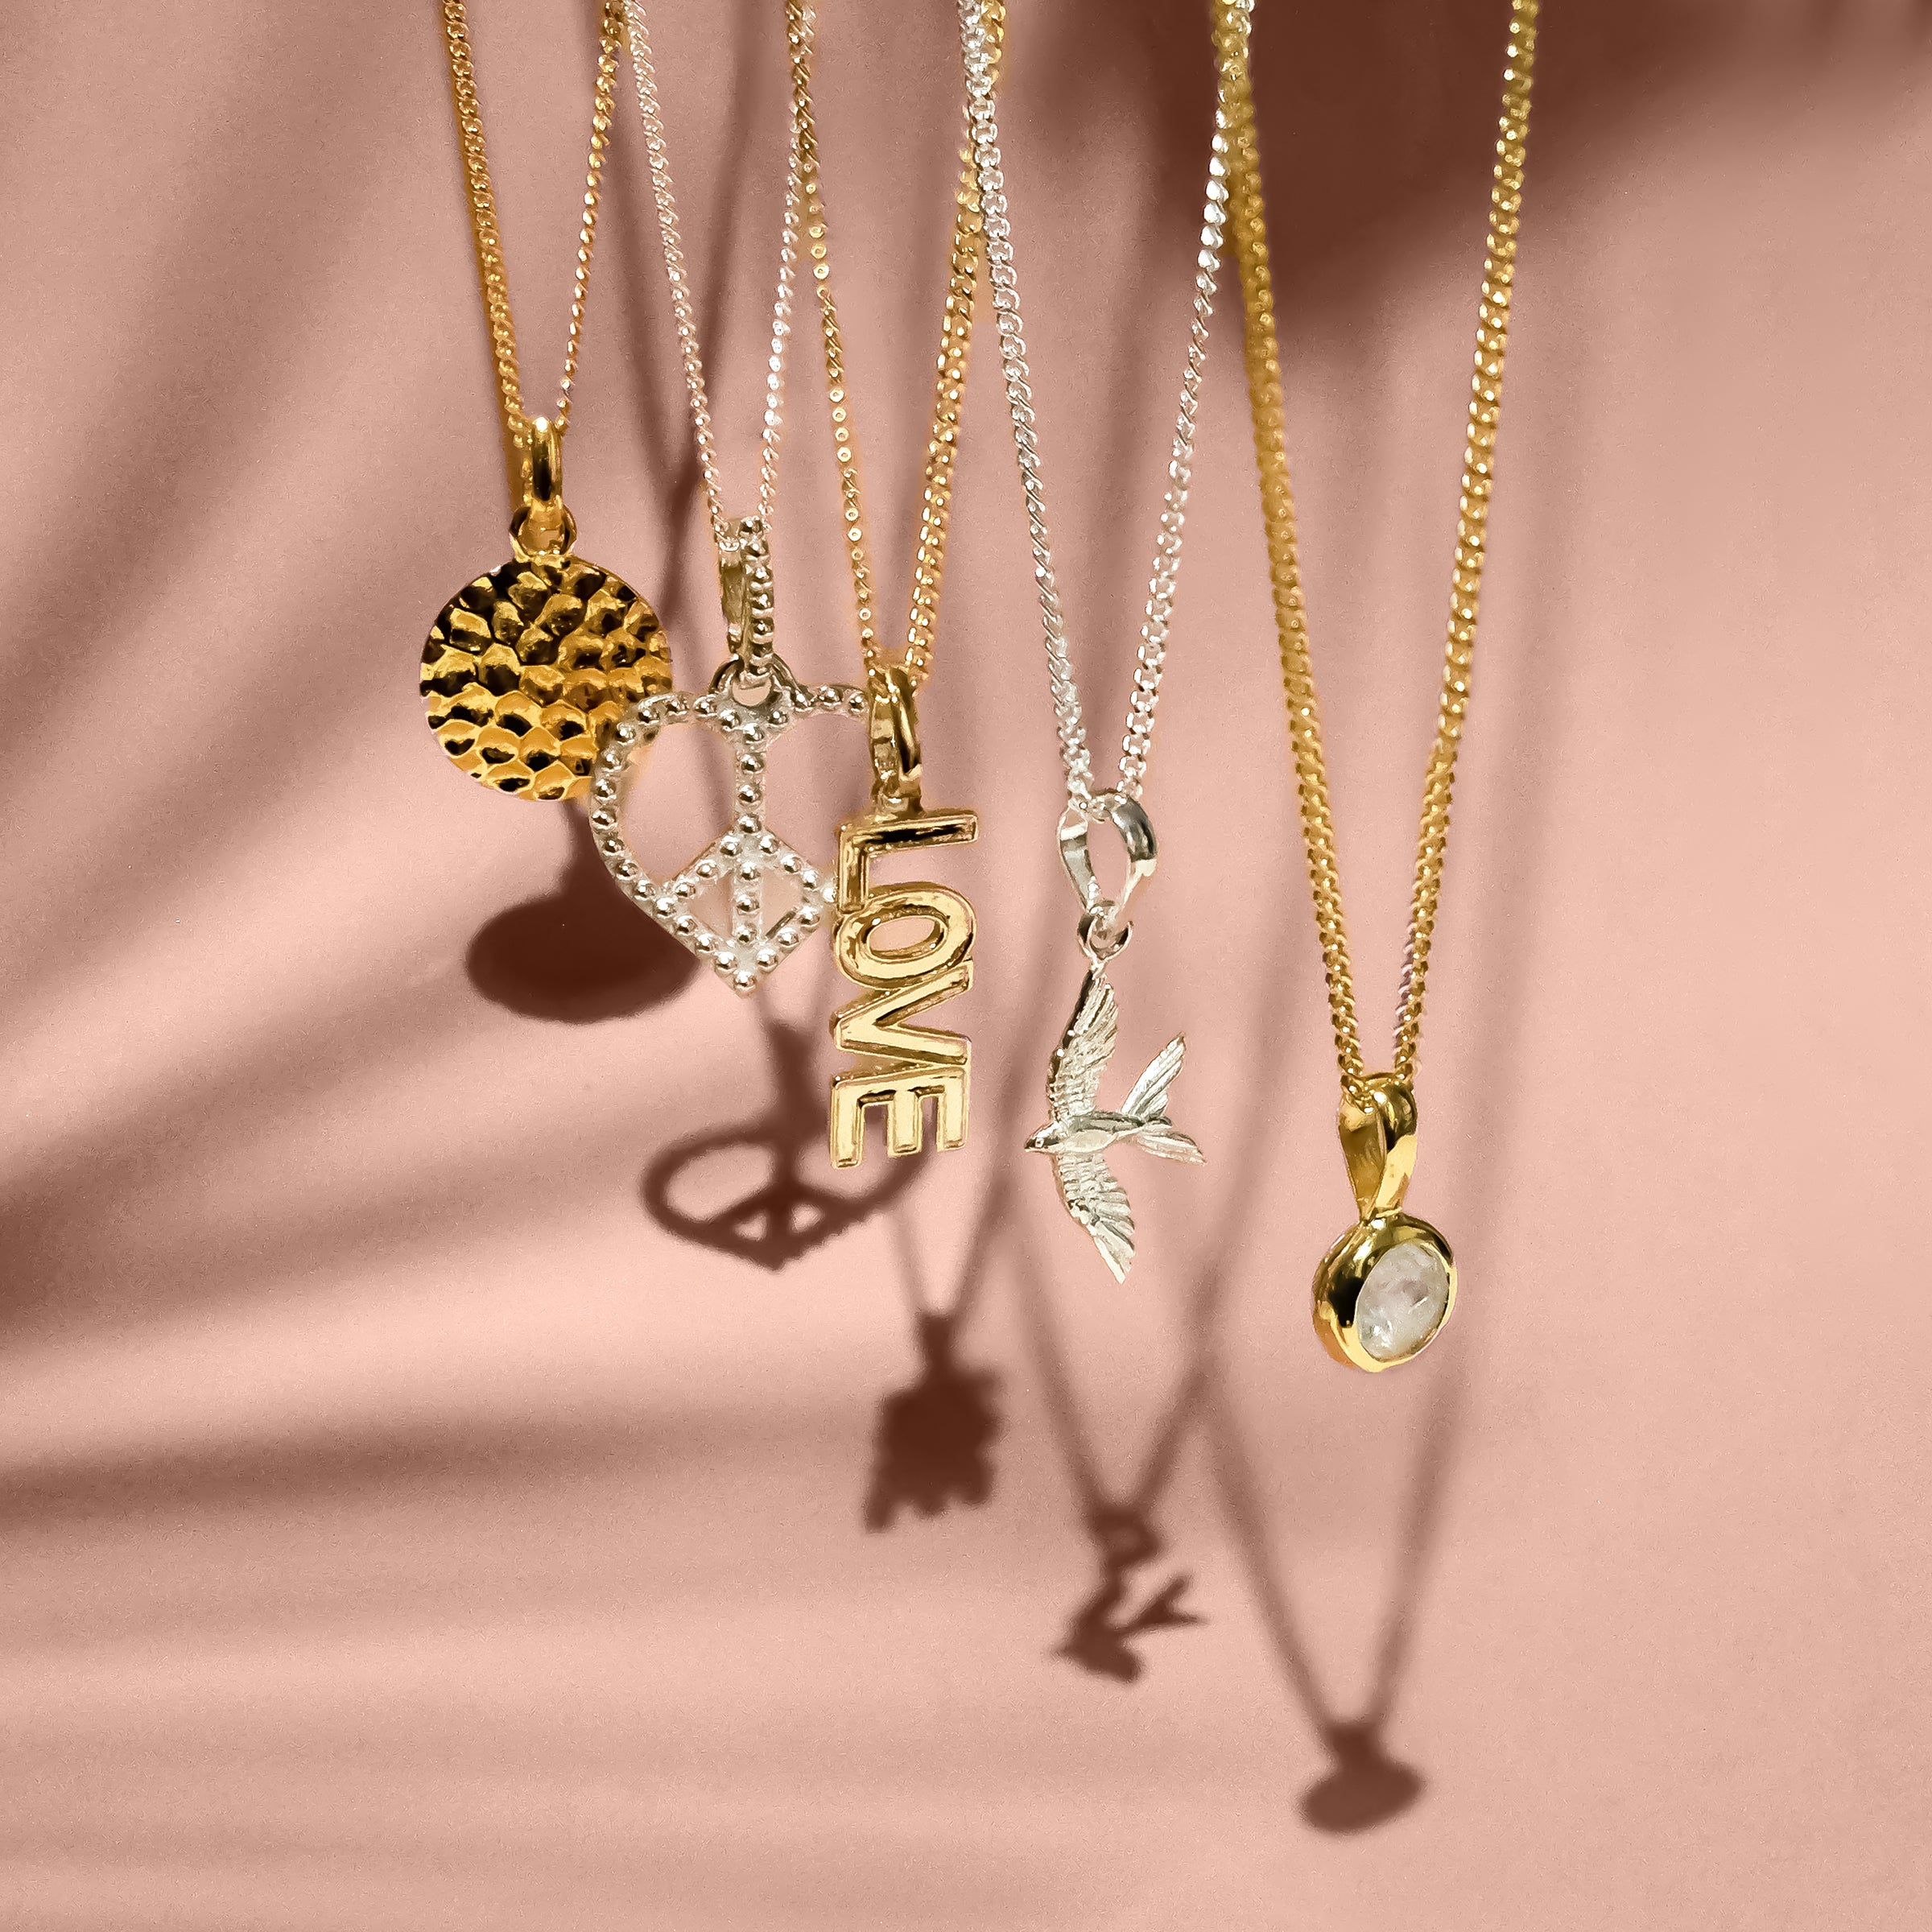 Silver and gold pendant necklaces